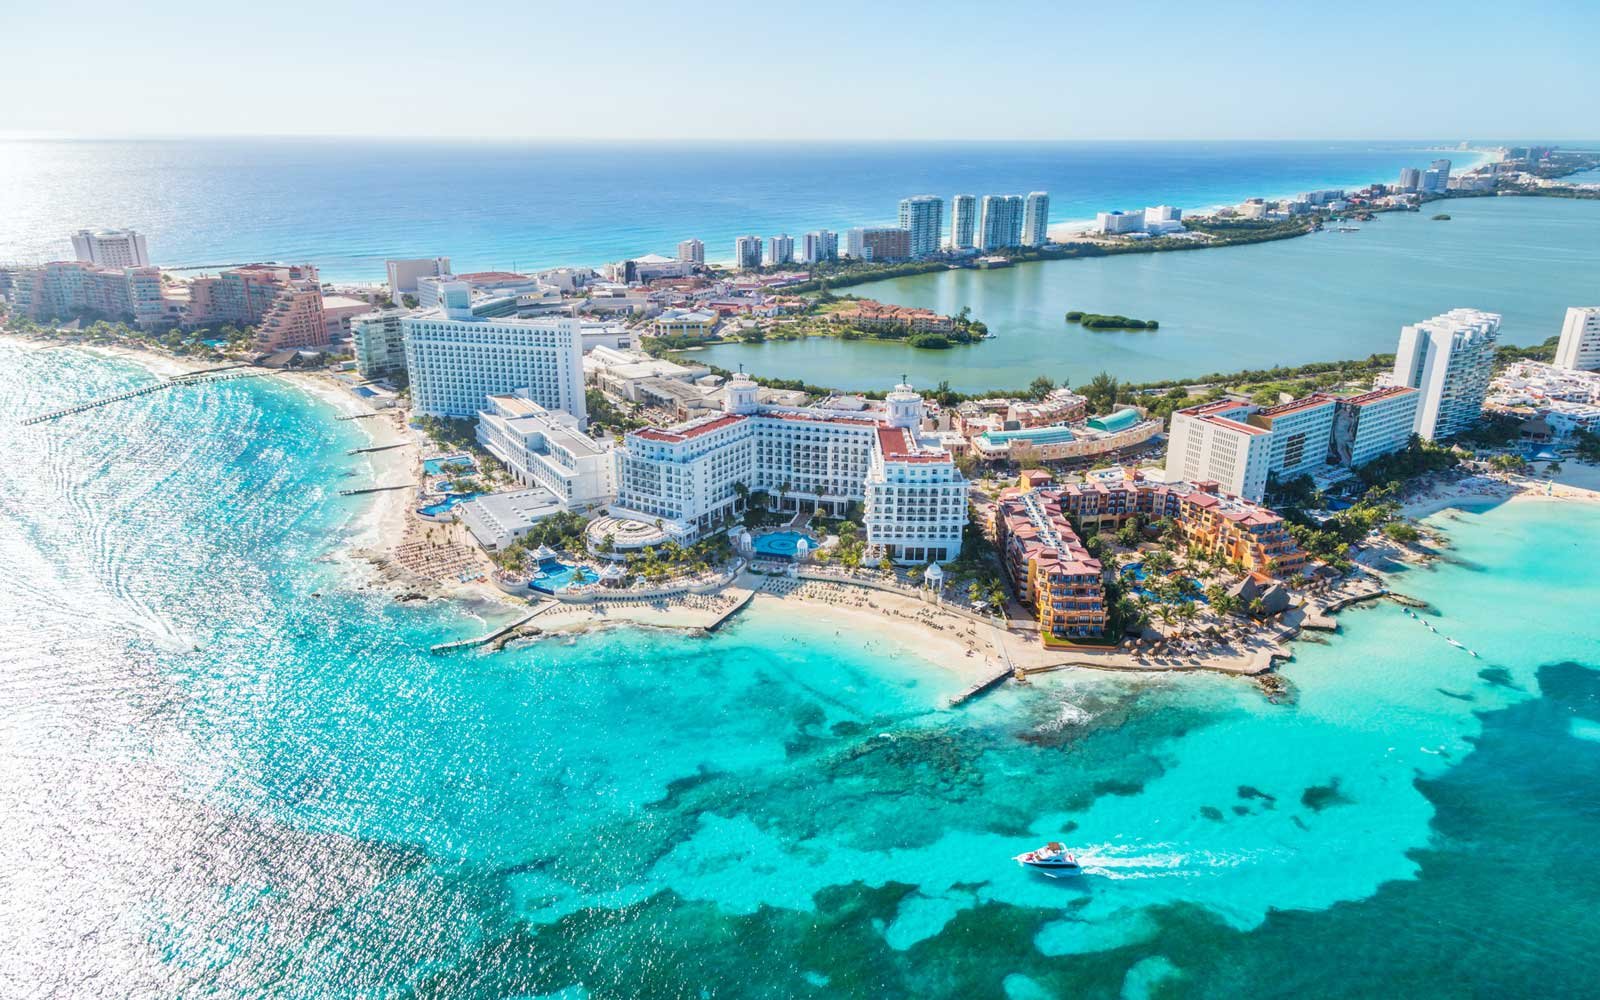 5 Low Cost Tourist Attractions in Cancun